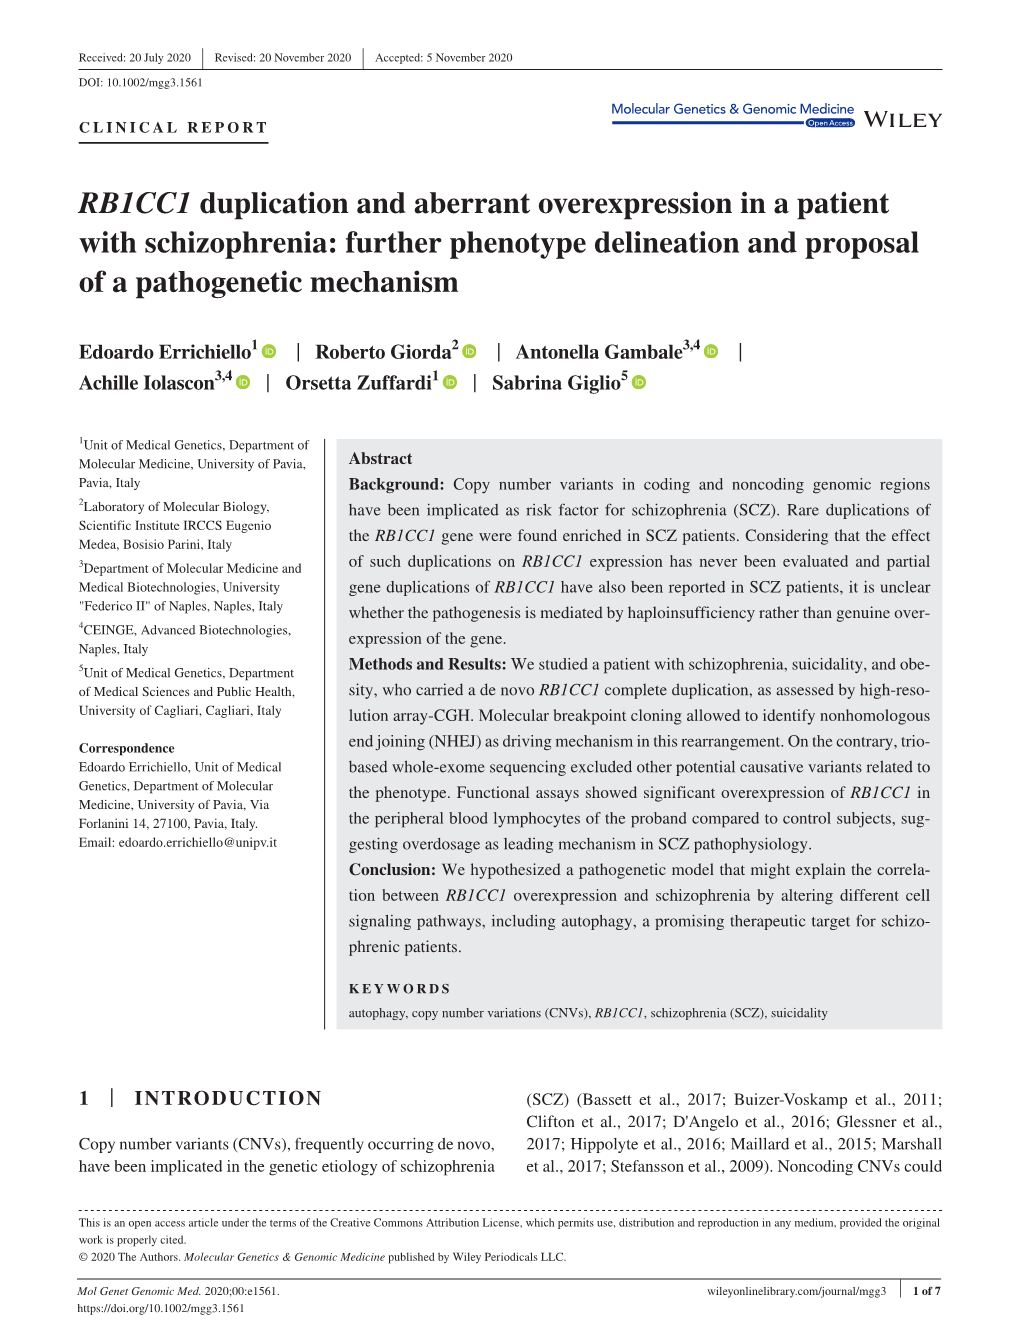 RB1CC1 Duplication and Aberrant Overexpression in a Patient with Schizophrenia: Further Phenotype Delineation and Proposal of a Pathogenetic Mechanism